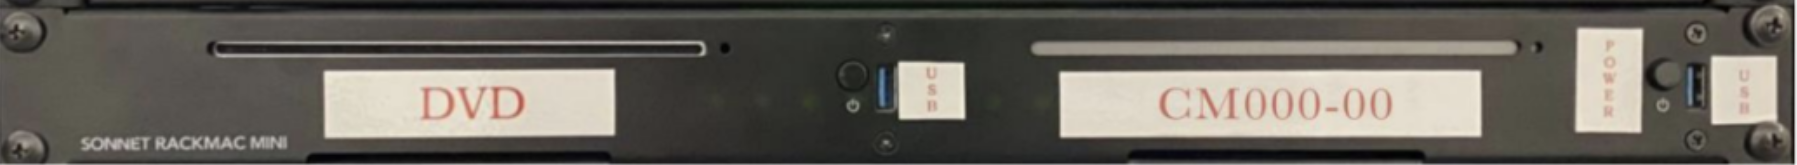 Picture of DVD player, USB ports, and power button on a panel. 